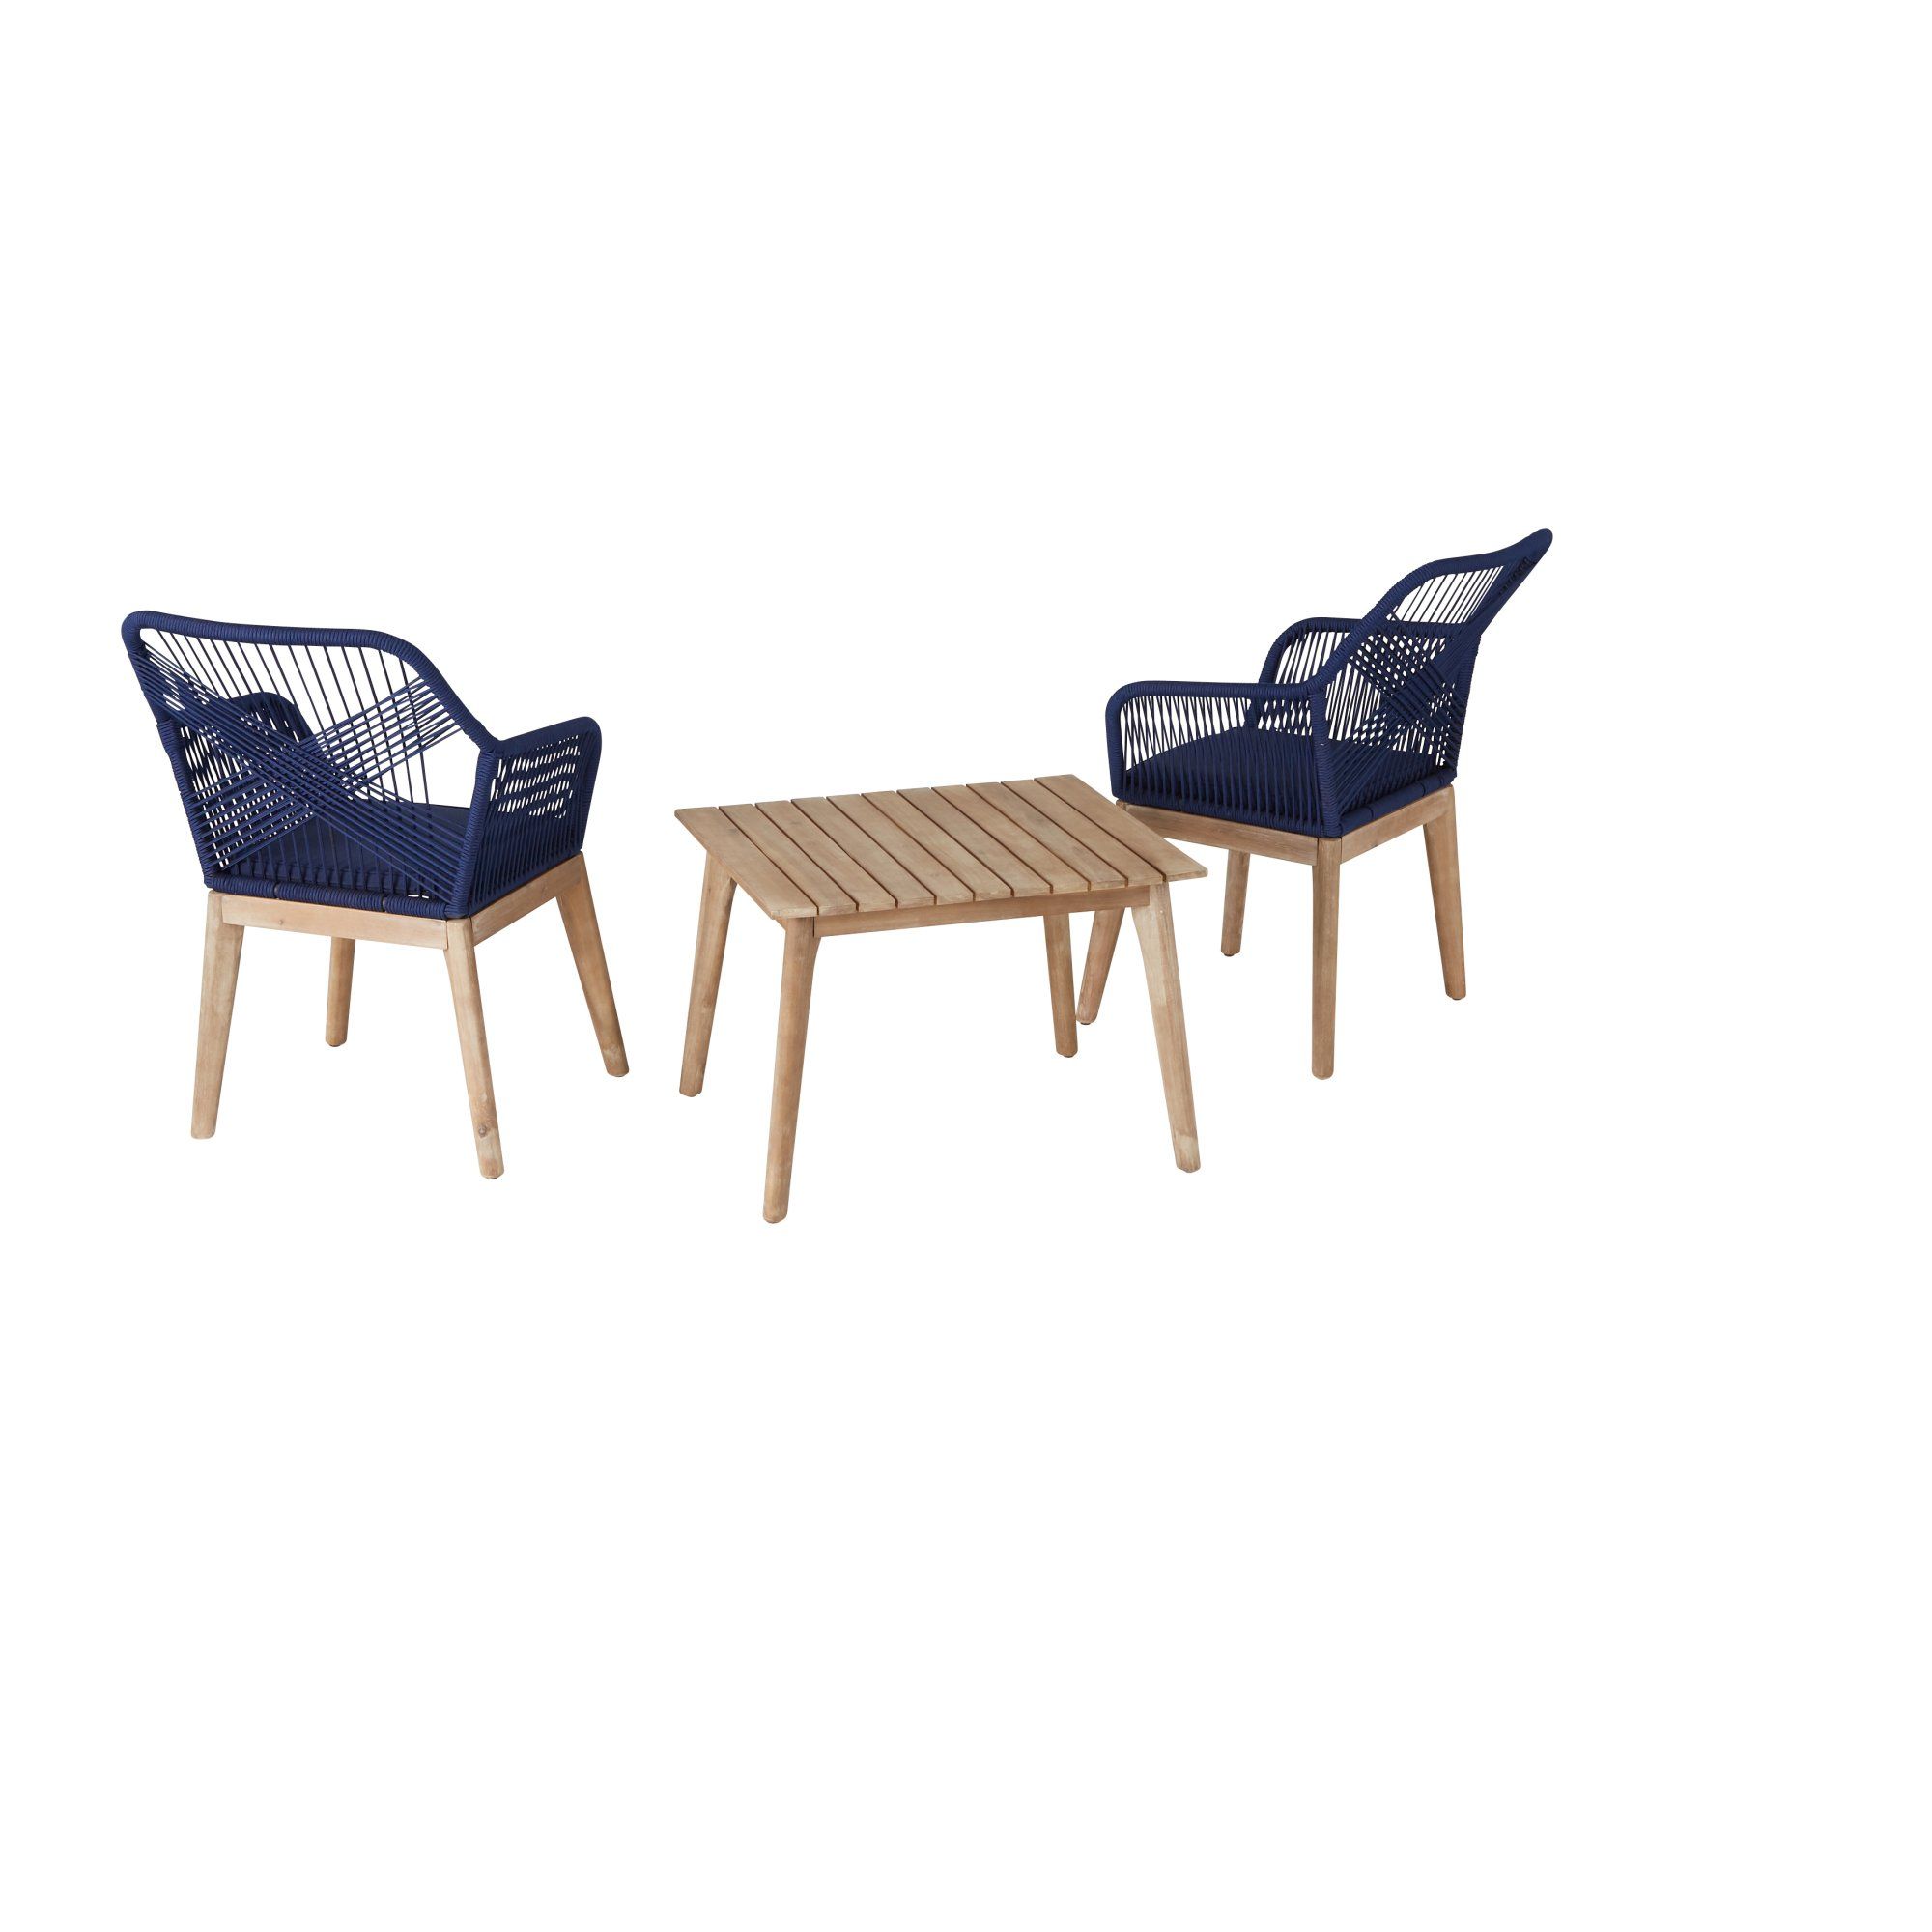 Gap Home Woven Rope Outdoor 3 Piece Conversation Set, Navy – Walmart For Woven Rope Outdoor 3 Piece Conversation Set (Photo 4 of 15)